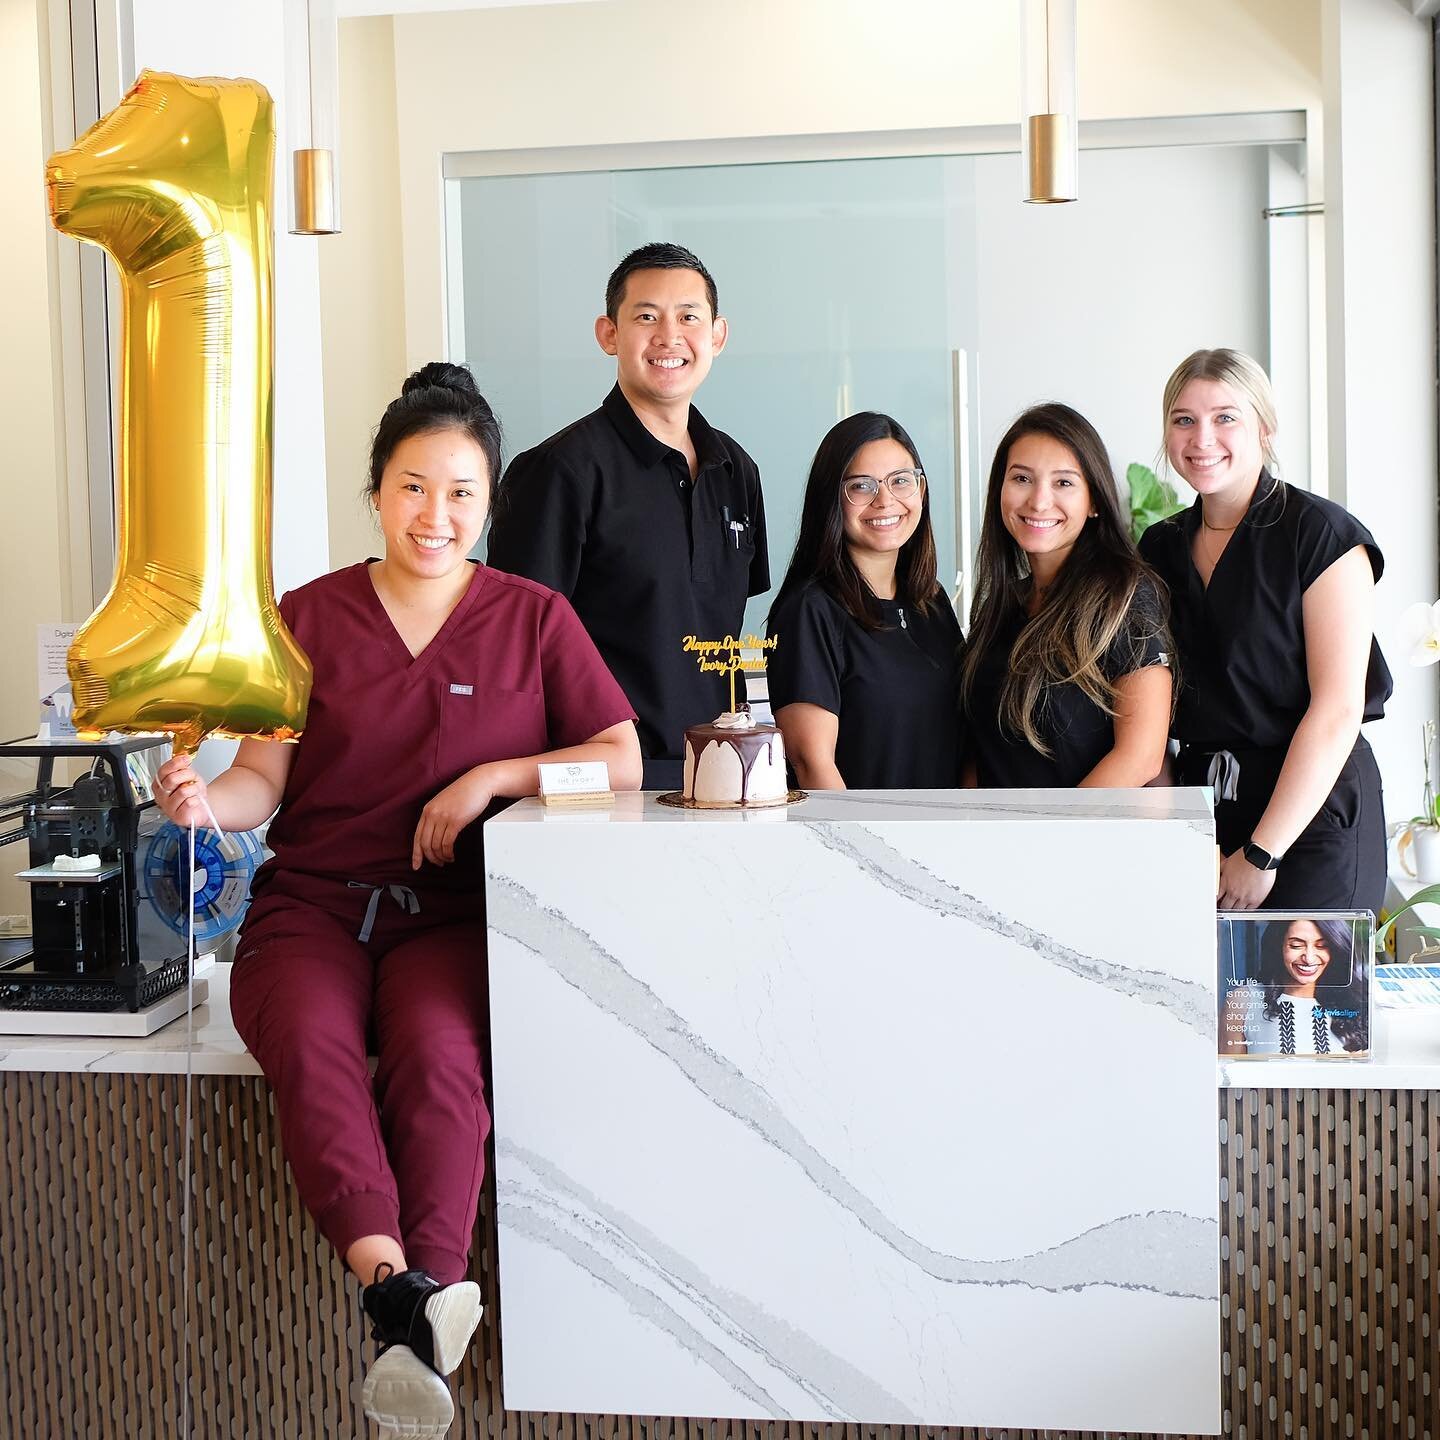 Happy ONE year to the Ivory Dental! 🎉 We can&rsquo;t believe we&rsquo;ve been open an entire year already! Thank you to our amazing staff for all the hard work you put in everyday to make our office what it is today. Also, thank you to all of our pa